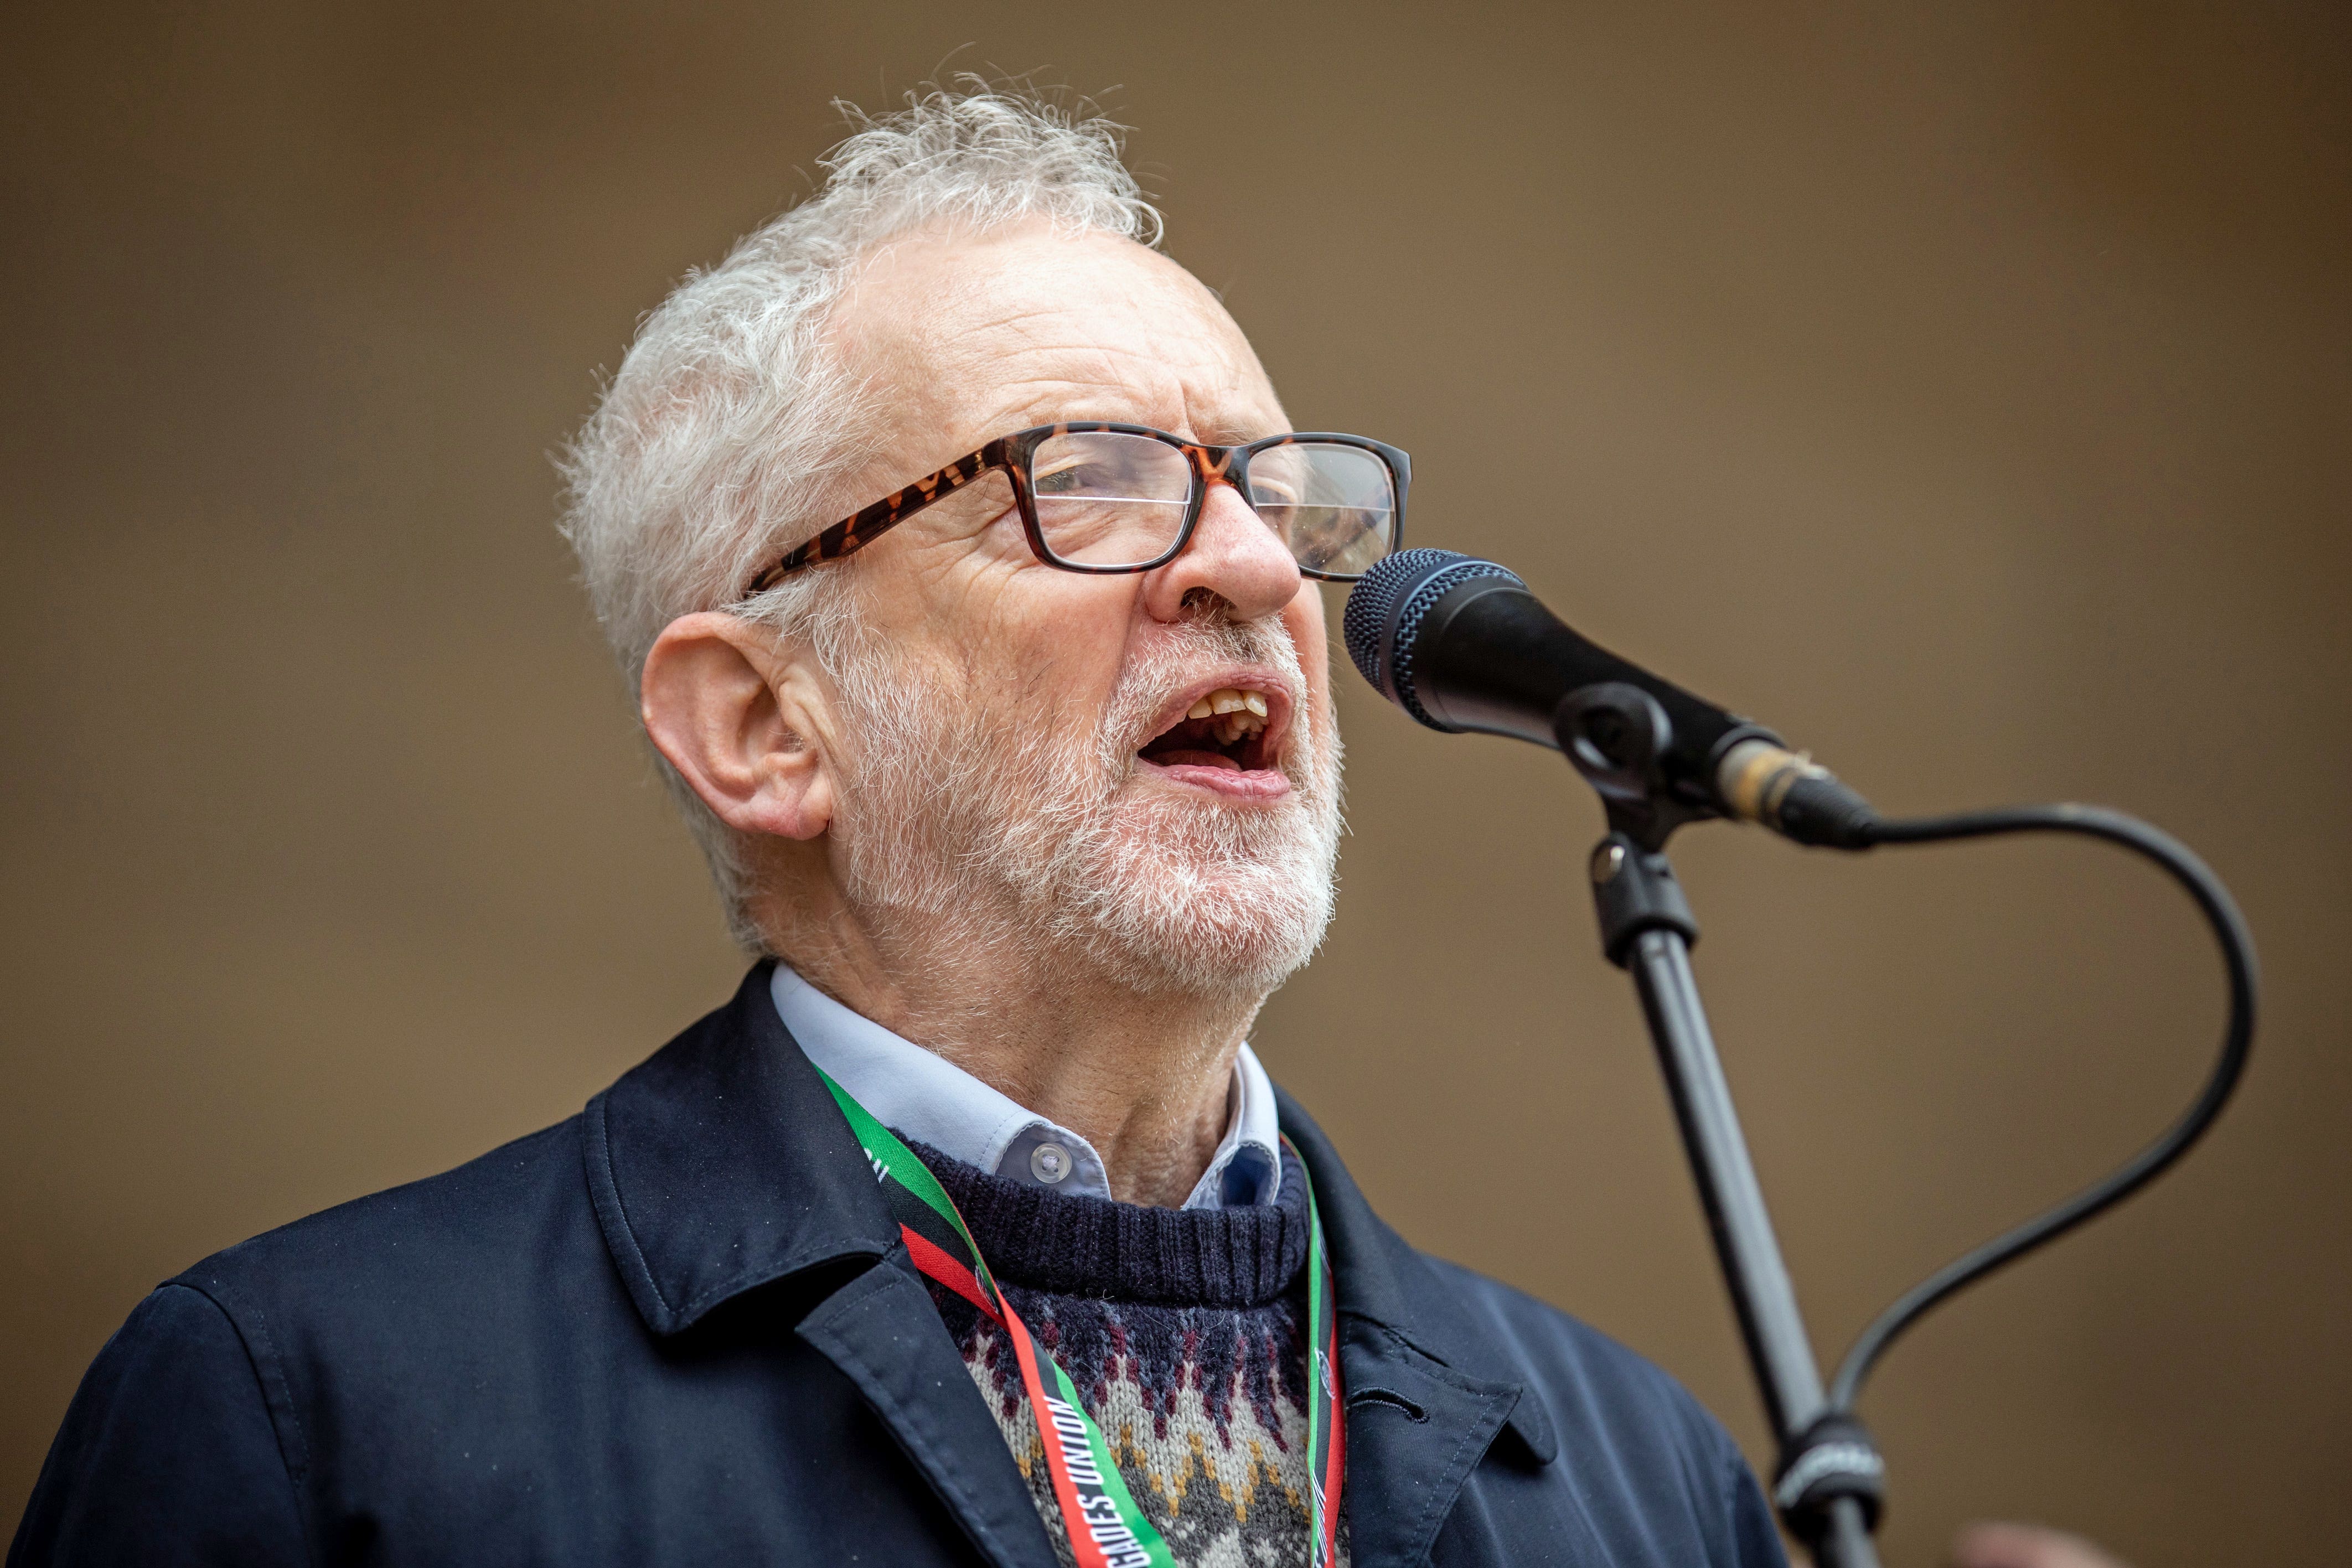 The spectre of Corbyn remains – but how much power does it hold?